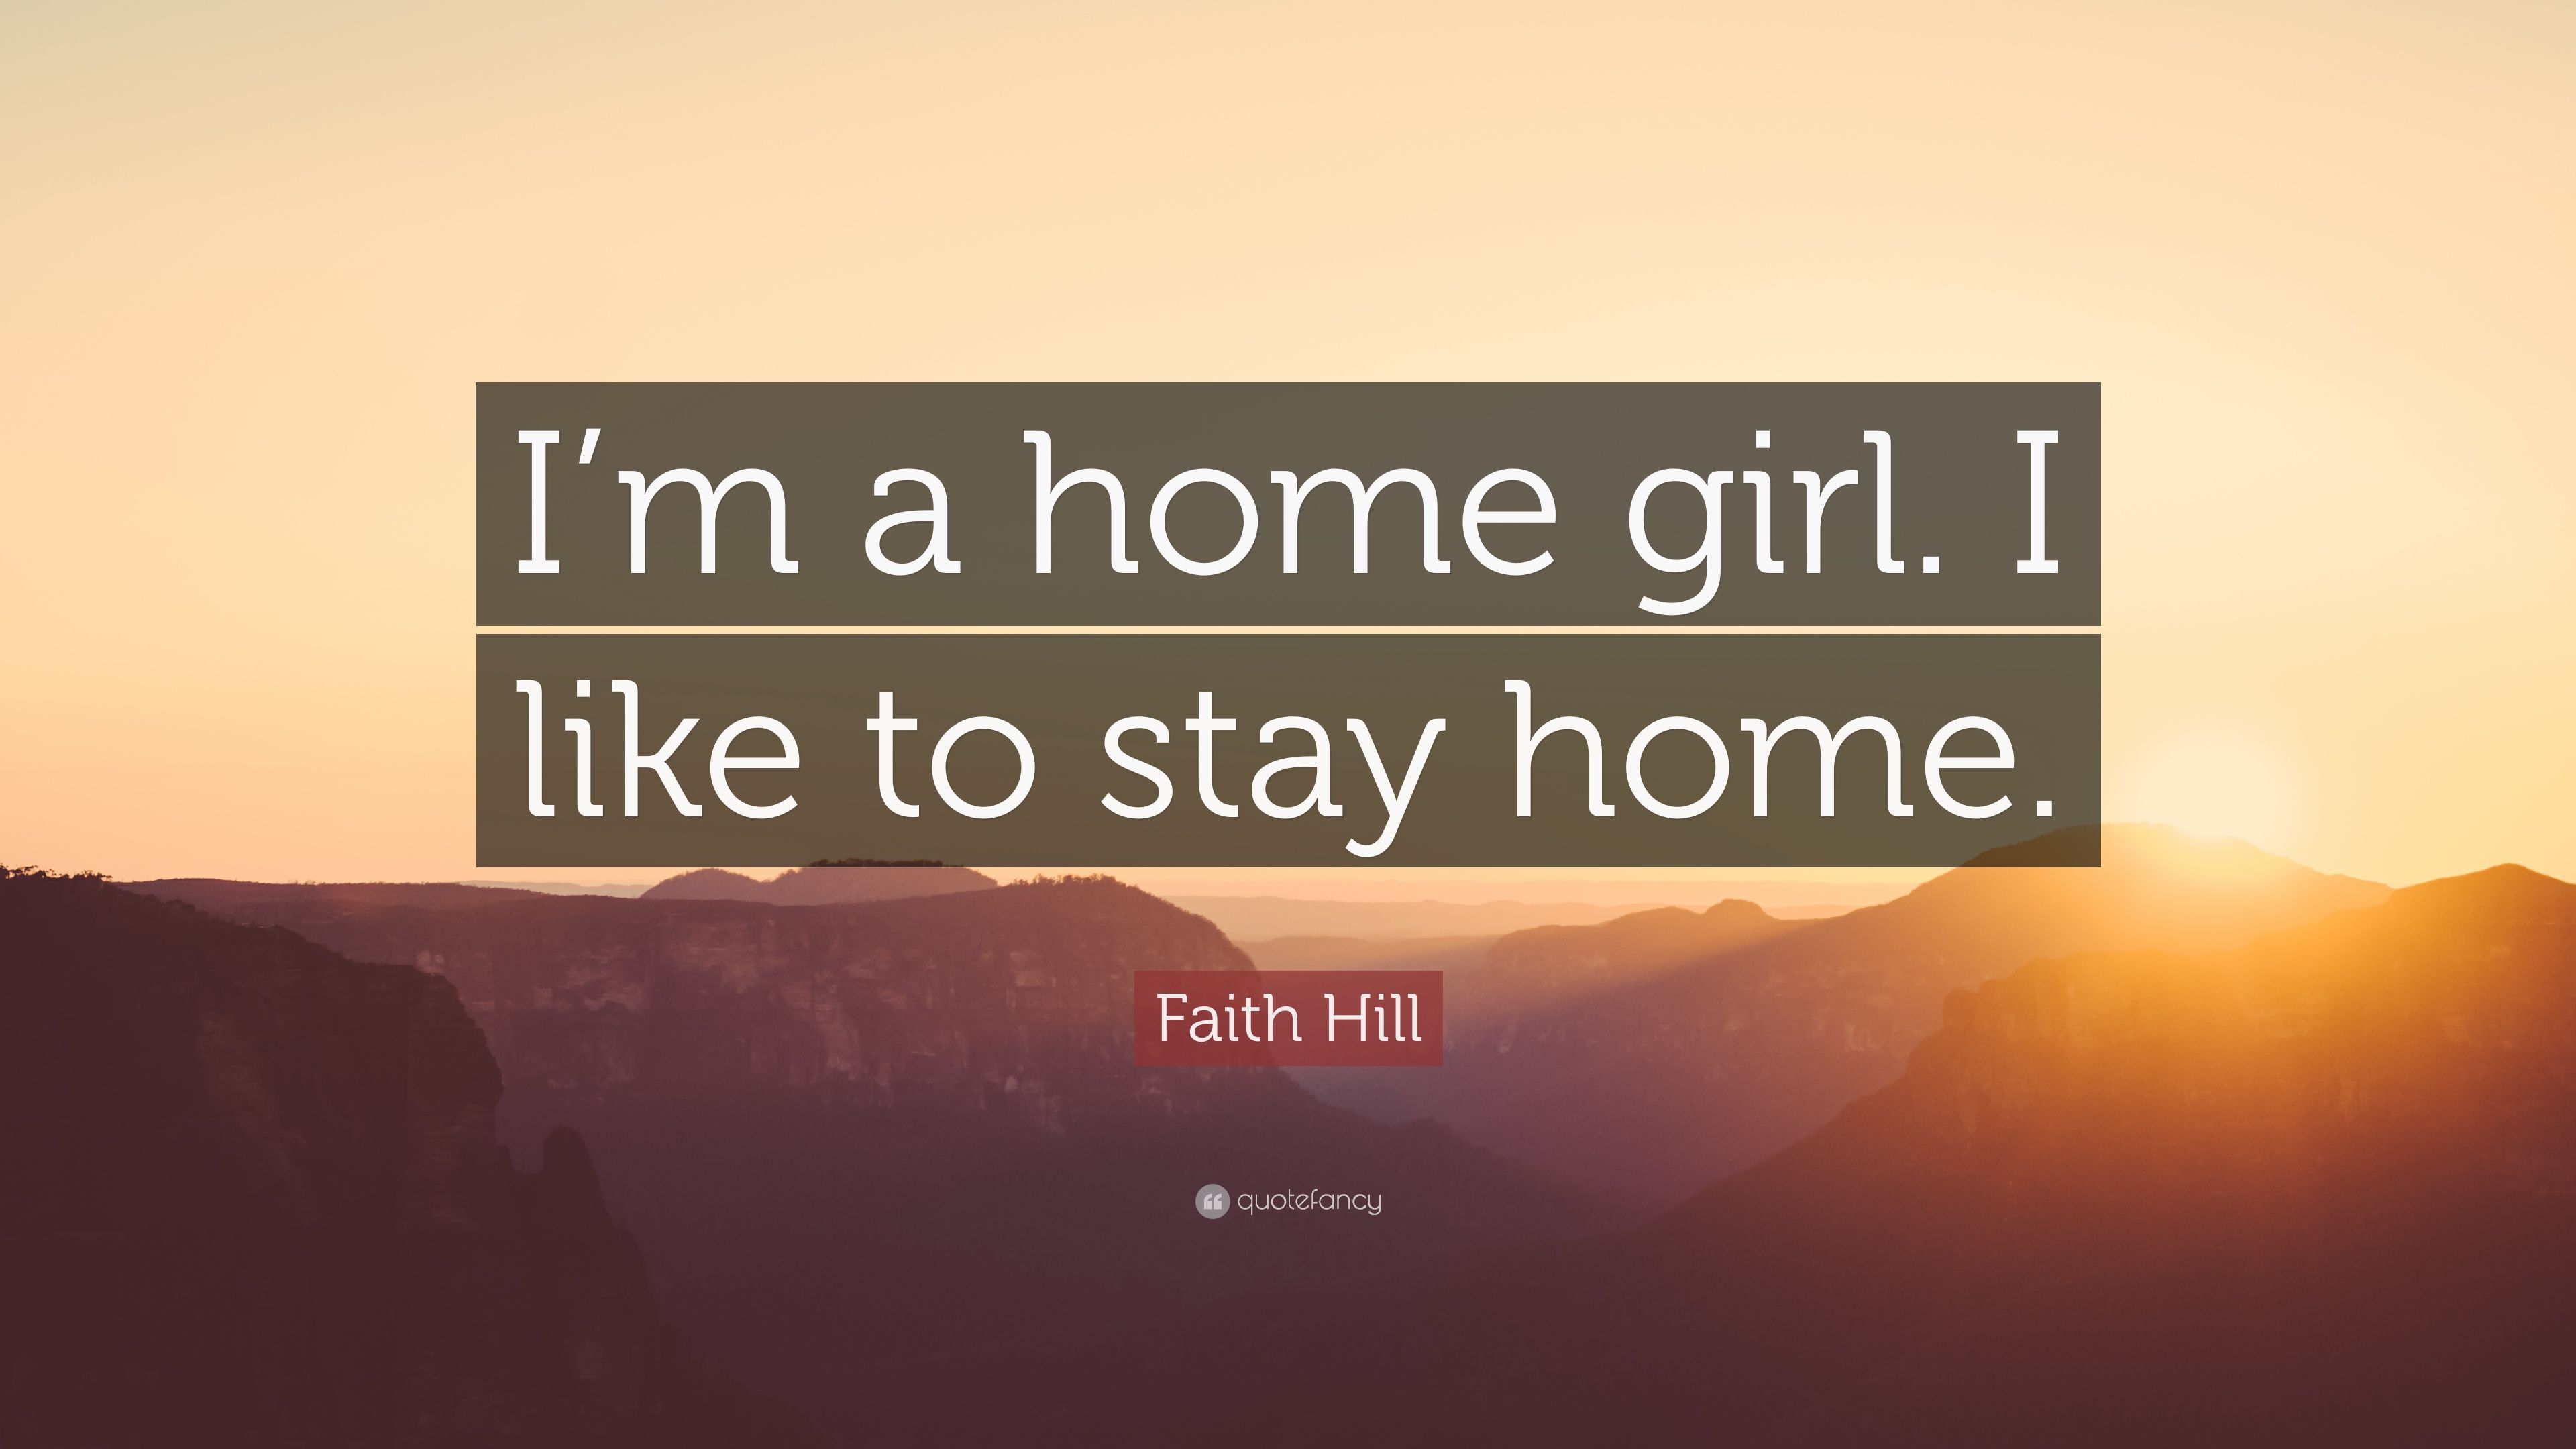 Faith Hill Quote: “I'm a home girl. I like to stay home.” 7